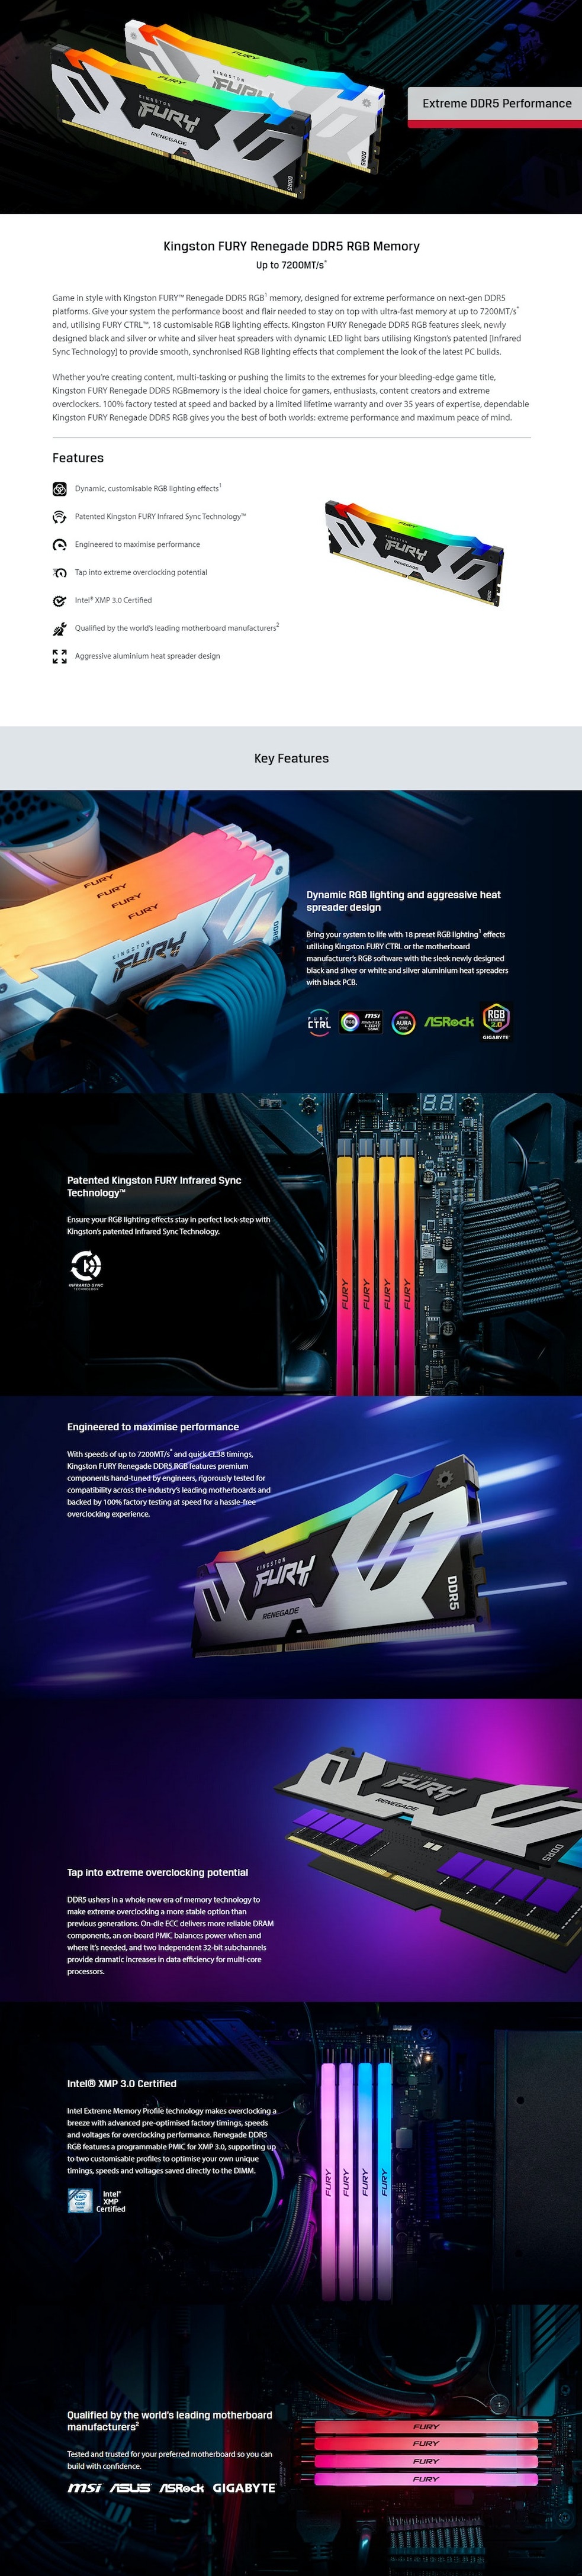 A large marketing image providing additional information about the product Kingston 48GB Kit (2x24GB) DDR5 Fury Renegade RGB CL38 7200Mhz - Black - Additional alt info not provided